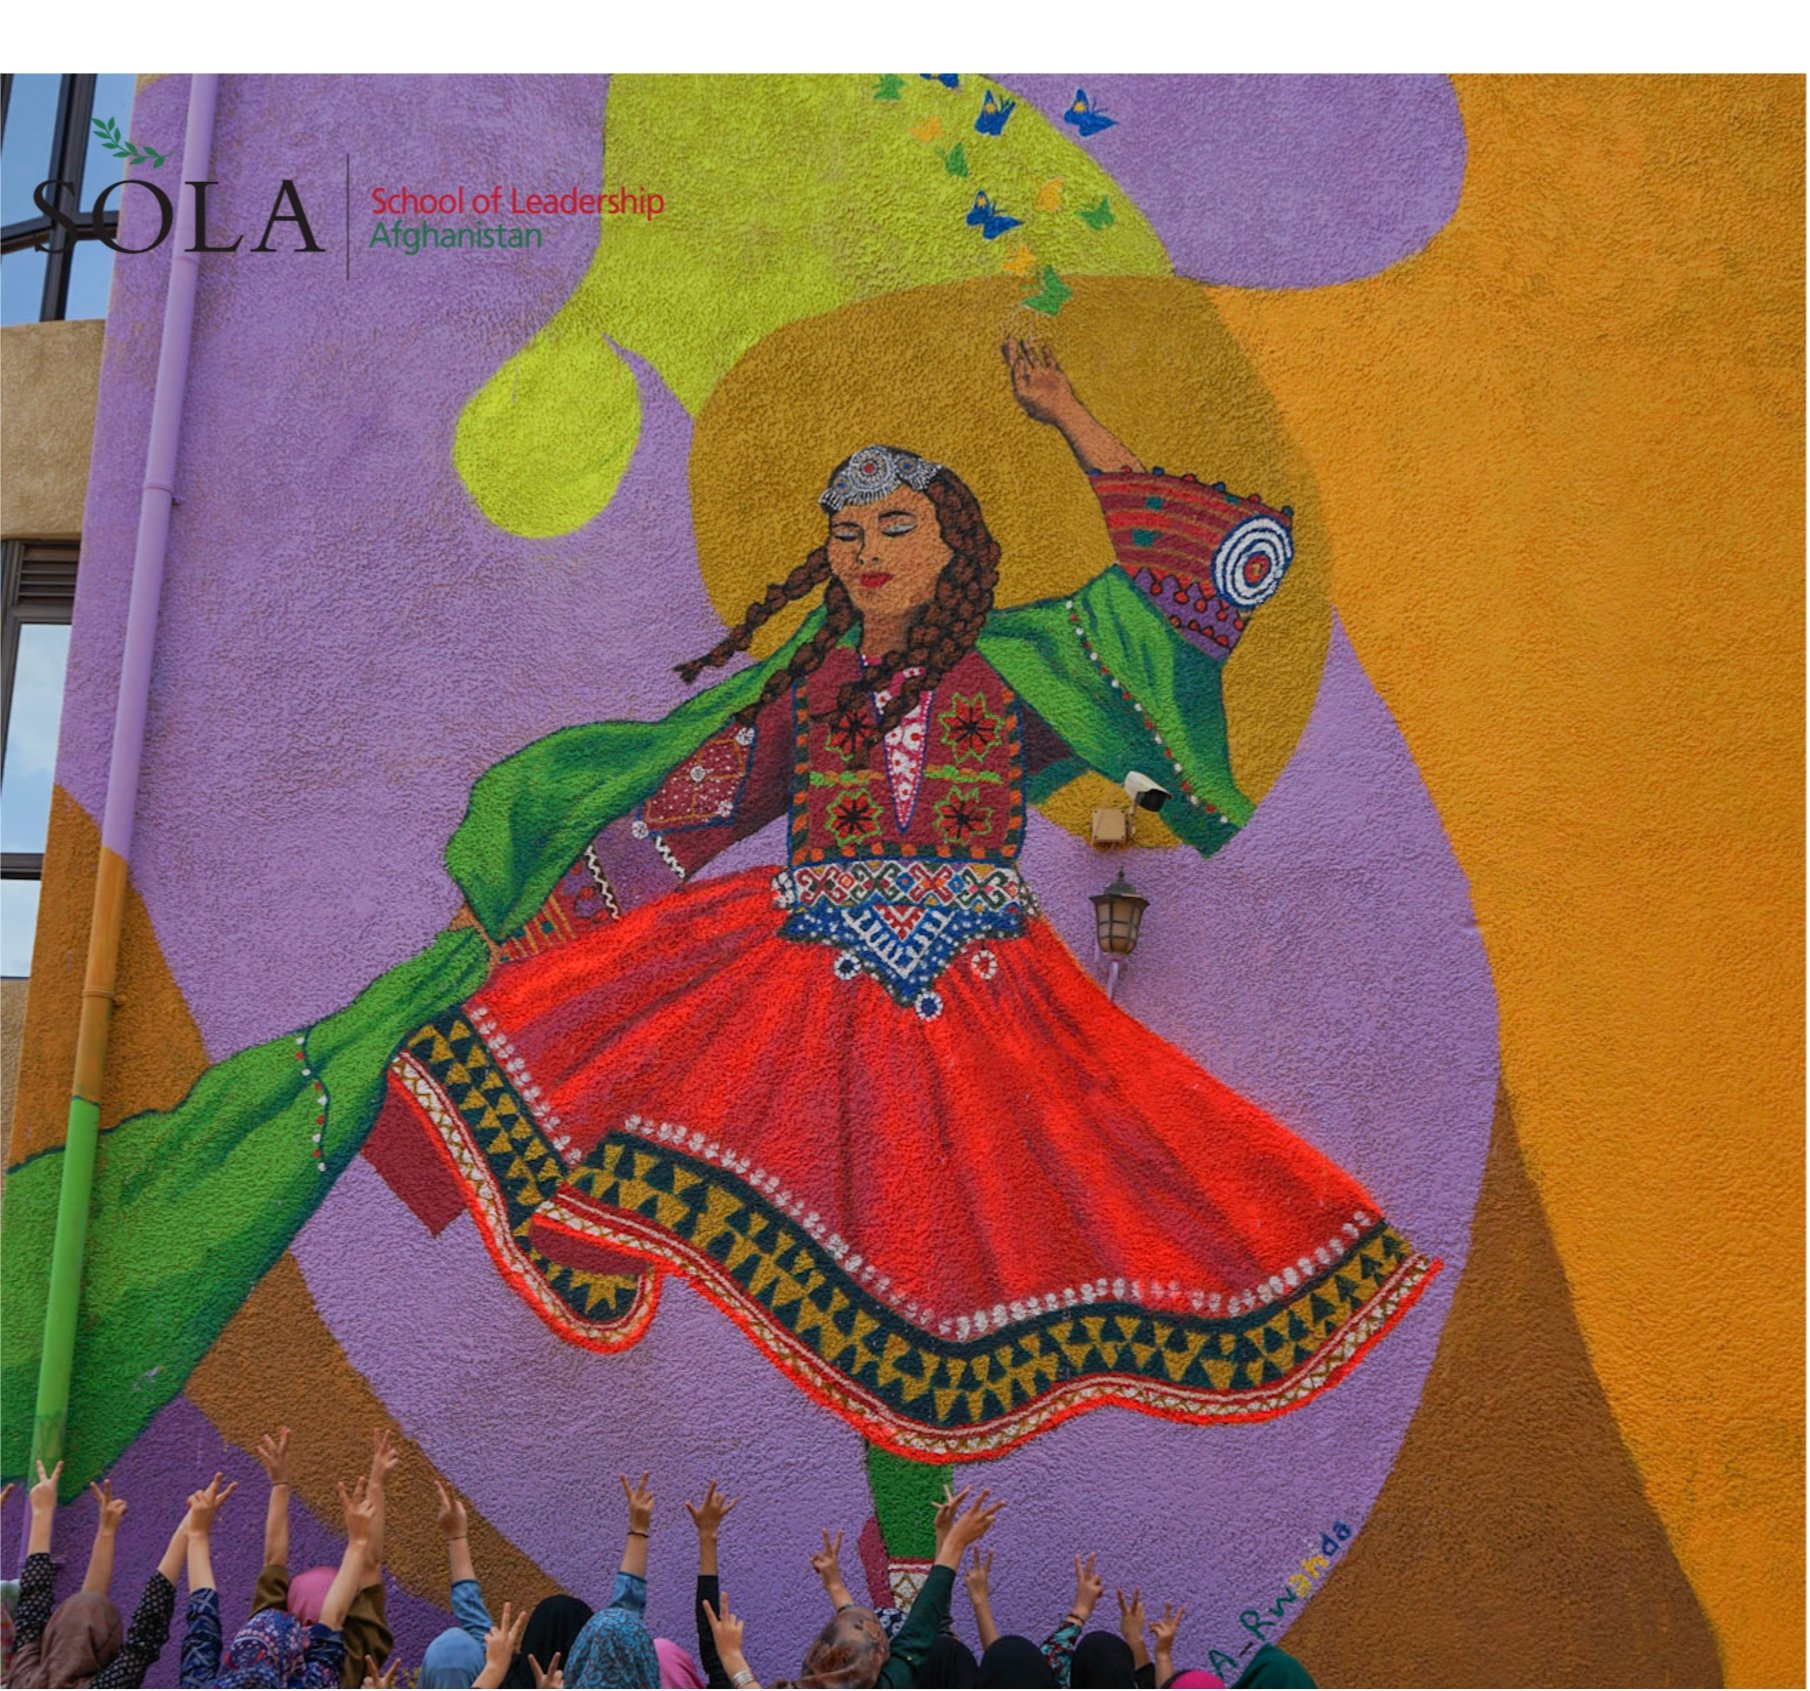  SOLA partnered with Colors of Connection where our students created a mural with a girl dancing the traditional Attan dance, celebrating Afghan culture and heritage and a homeland that they are now far away from. 